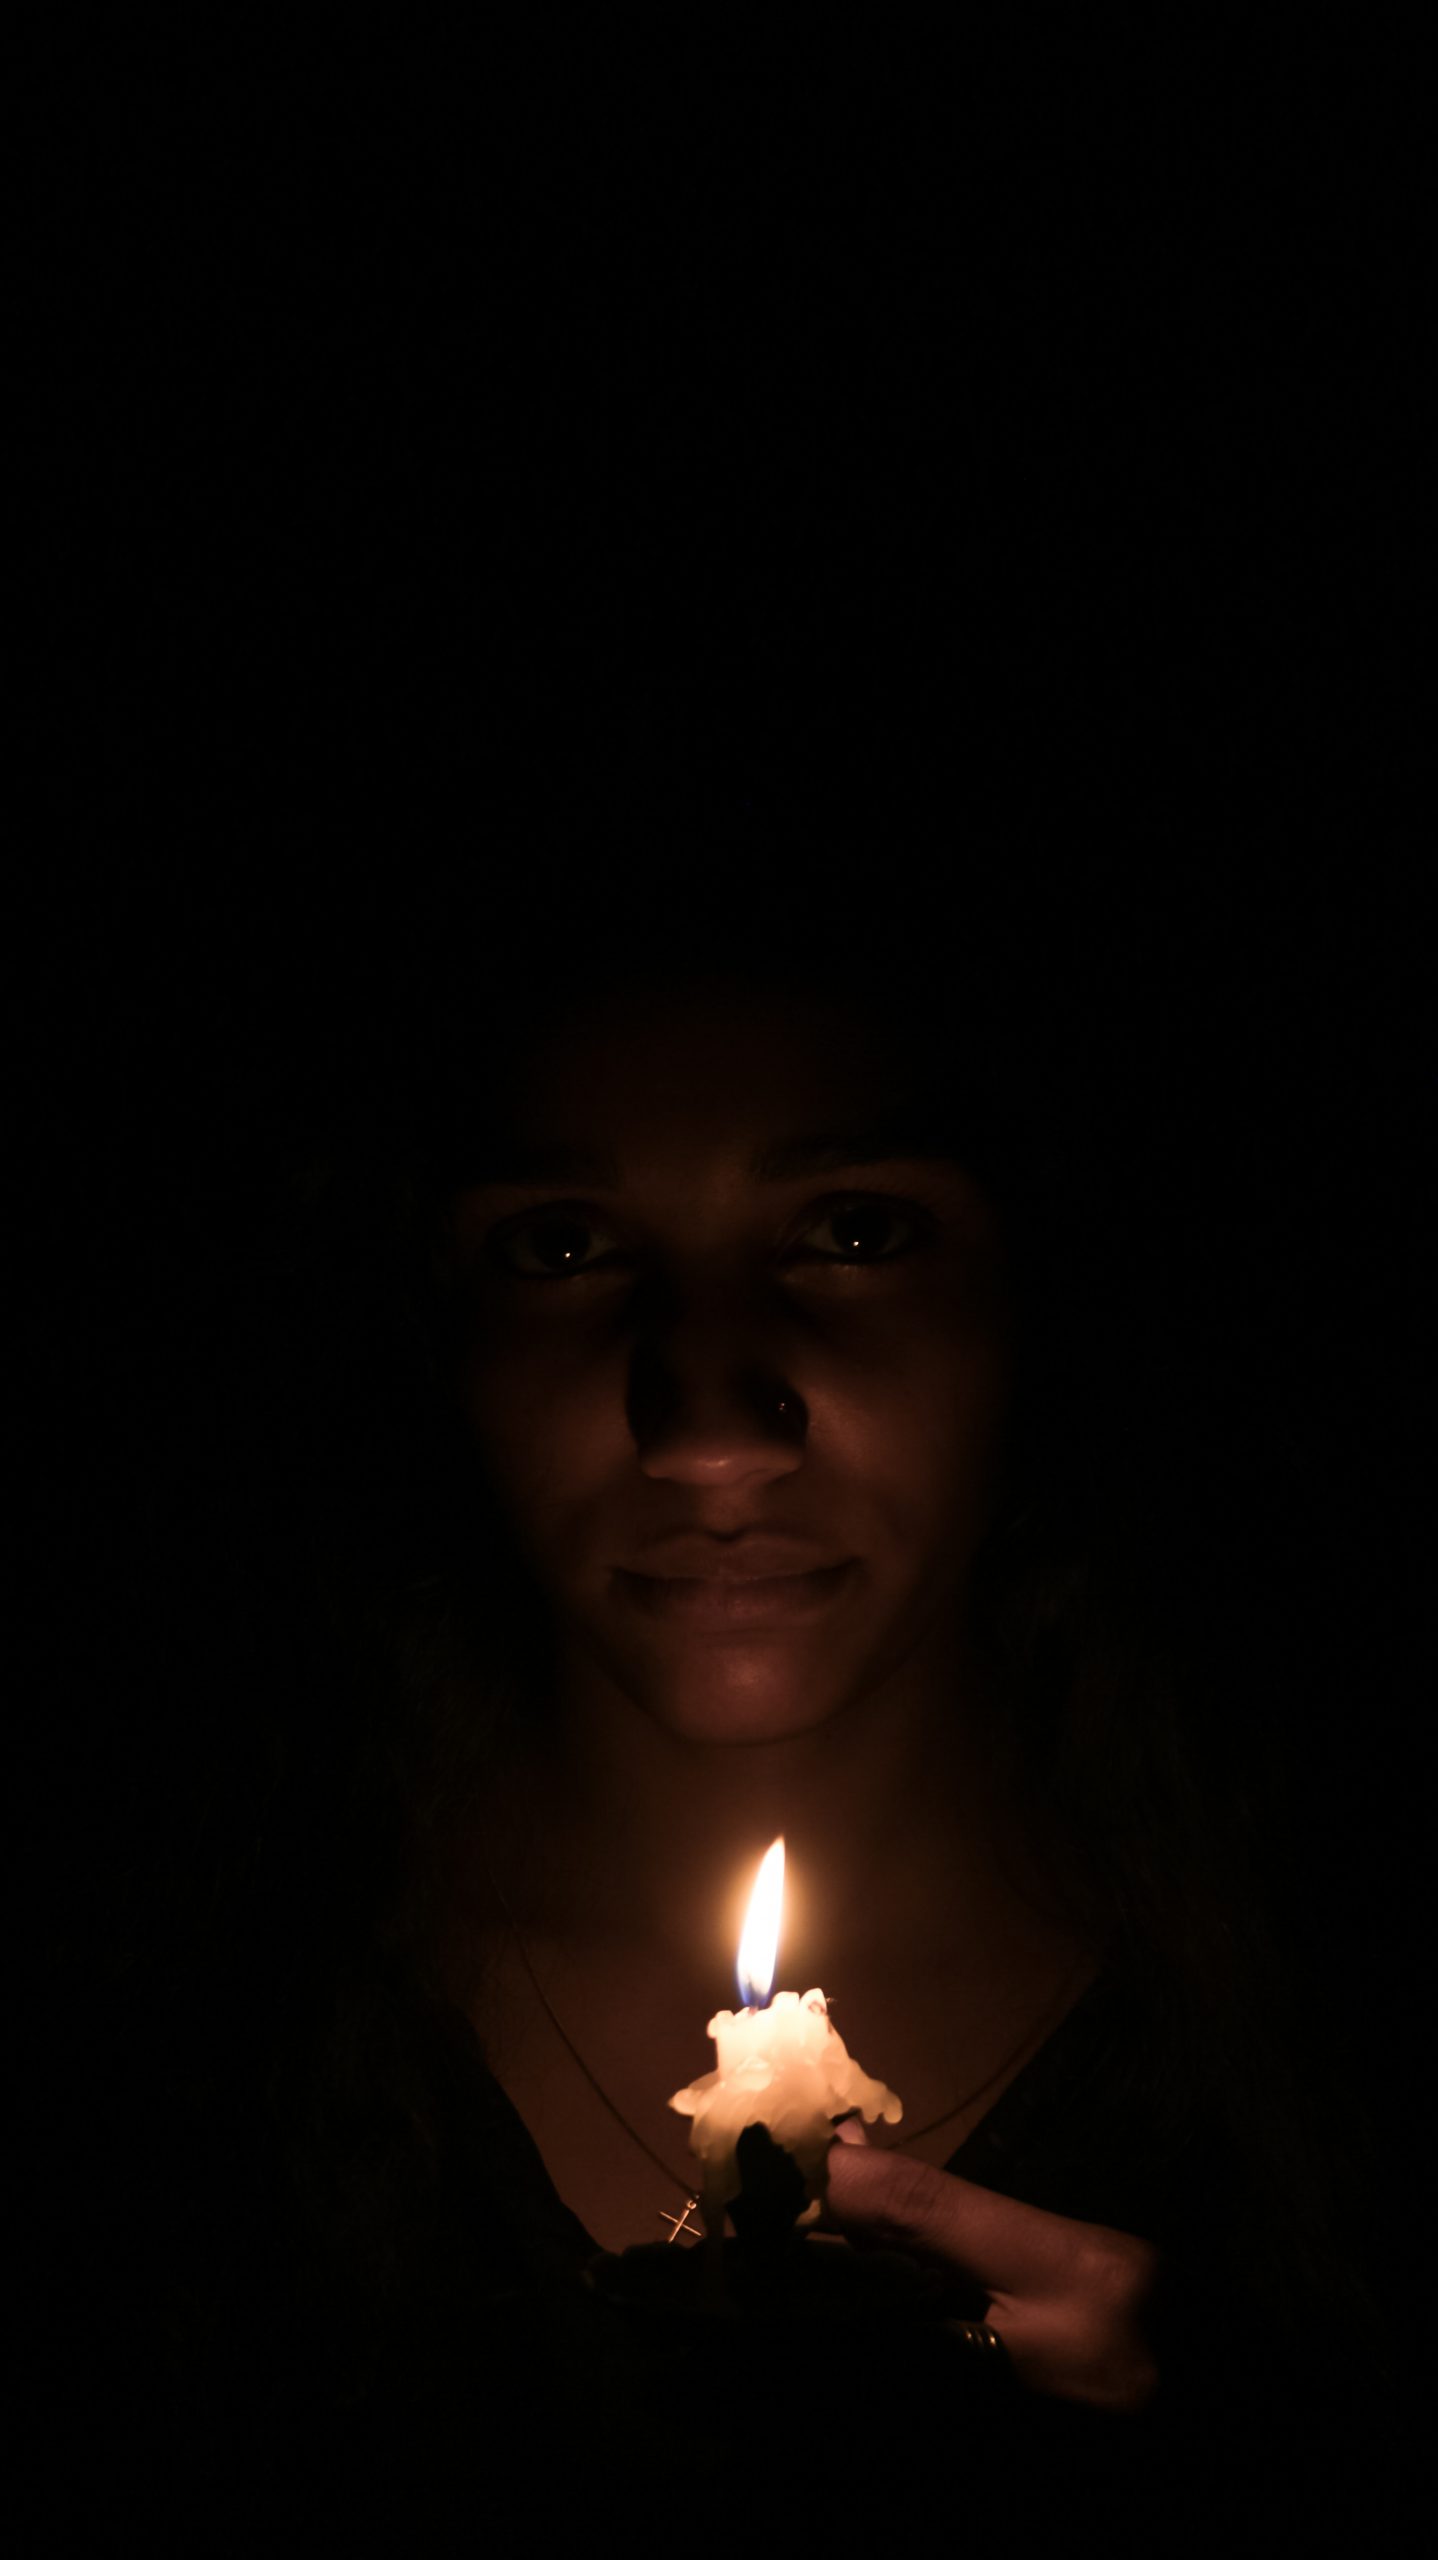 Holding a candle in darkness